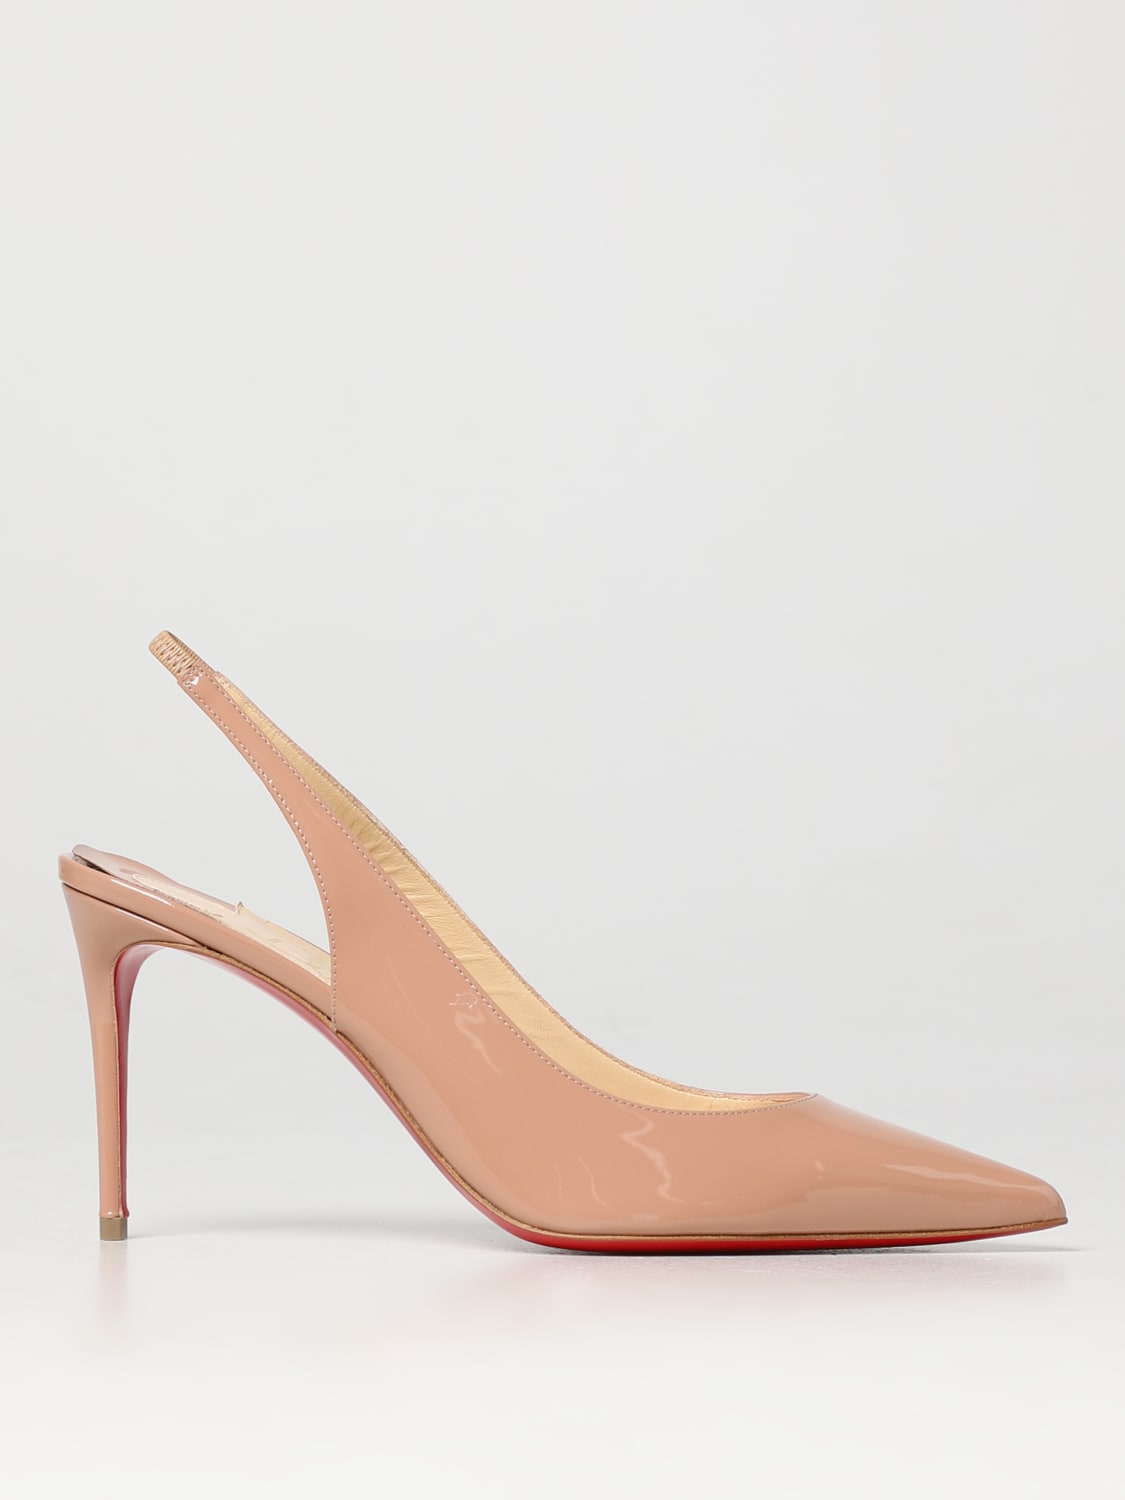 mytologi absorberende Maleri CHRISTIAN LOUBOUTIN: Kate patent leather slingback - Nude | Christian  Louboutin high heel shoes 3210598 online at GIGLIO.COM